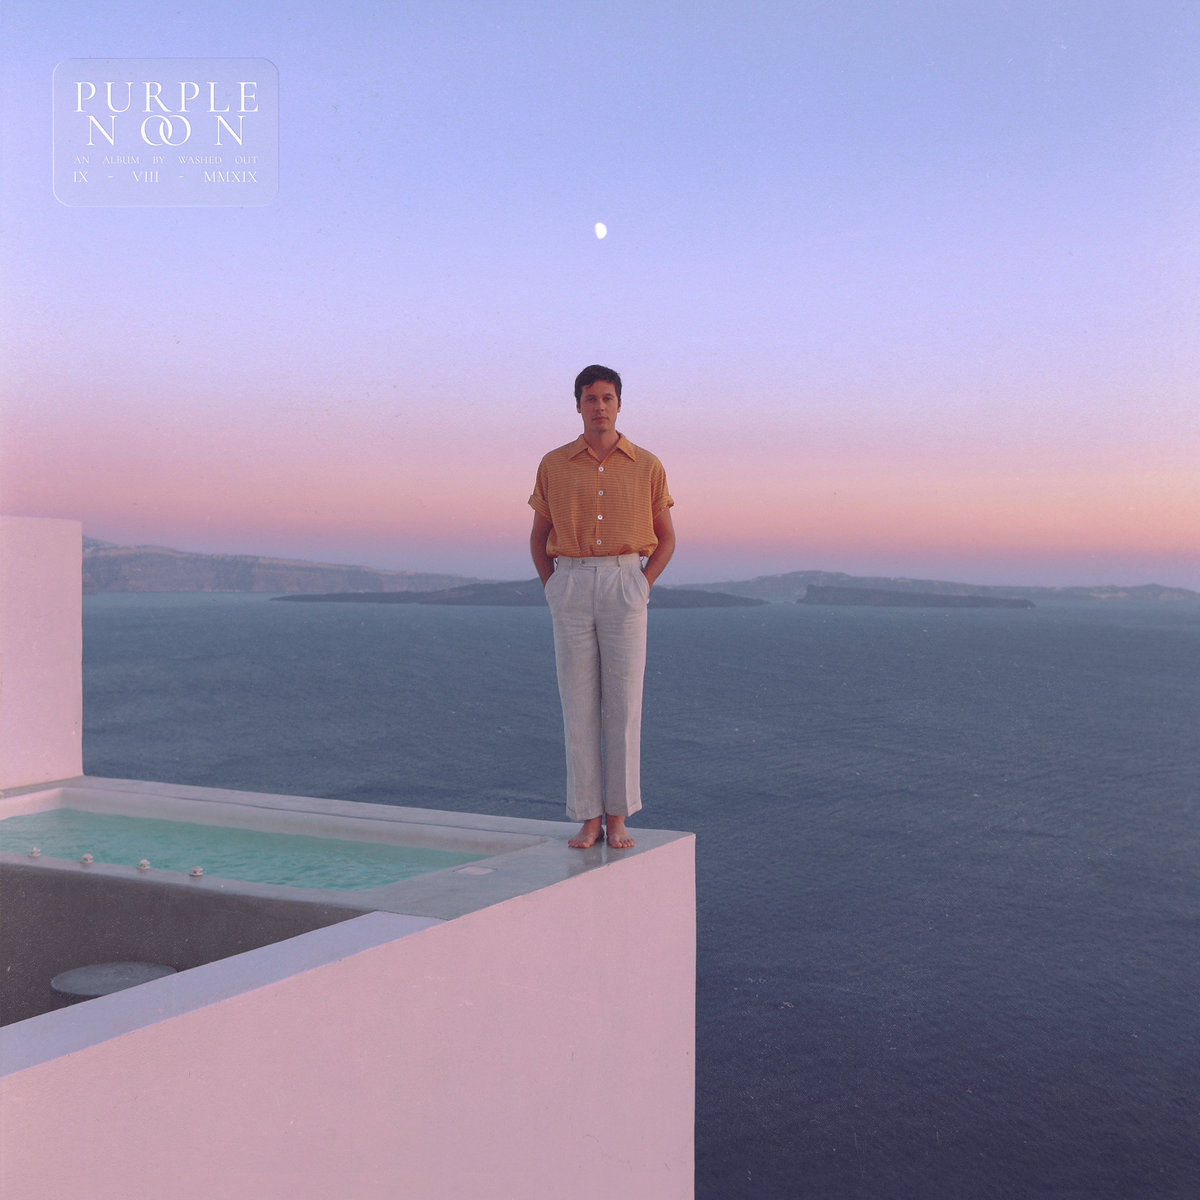 Washed Out "Purple noon" LP